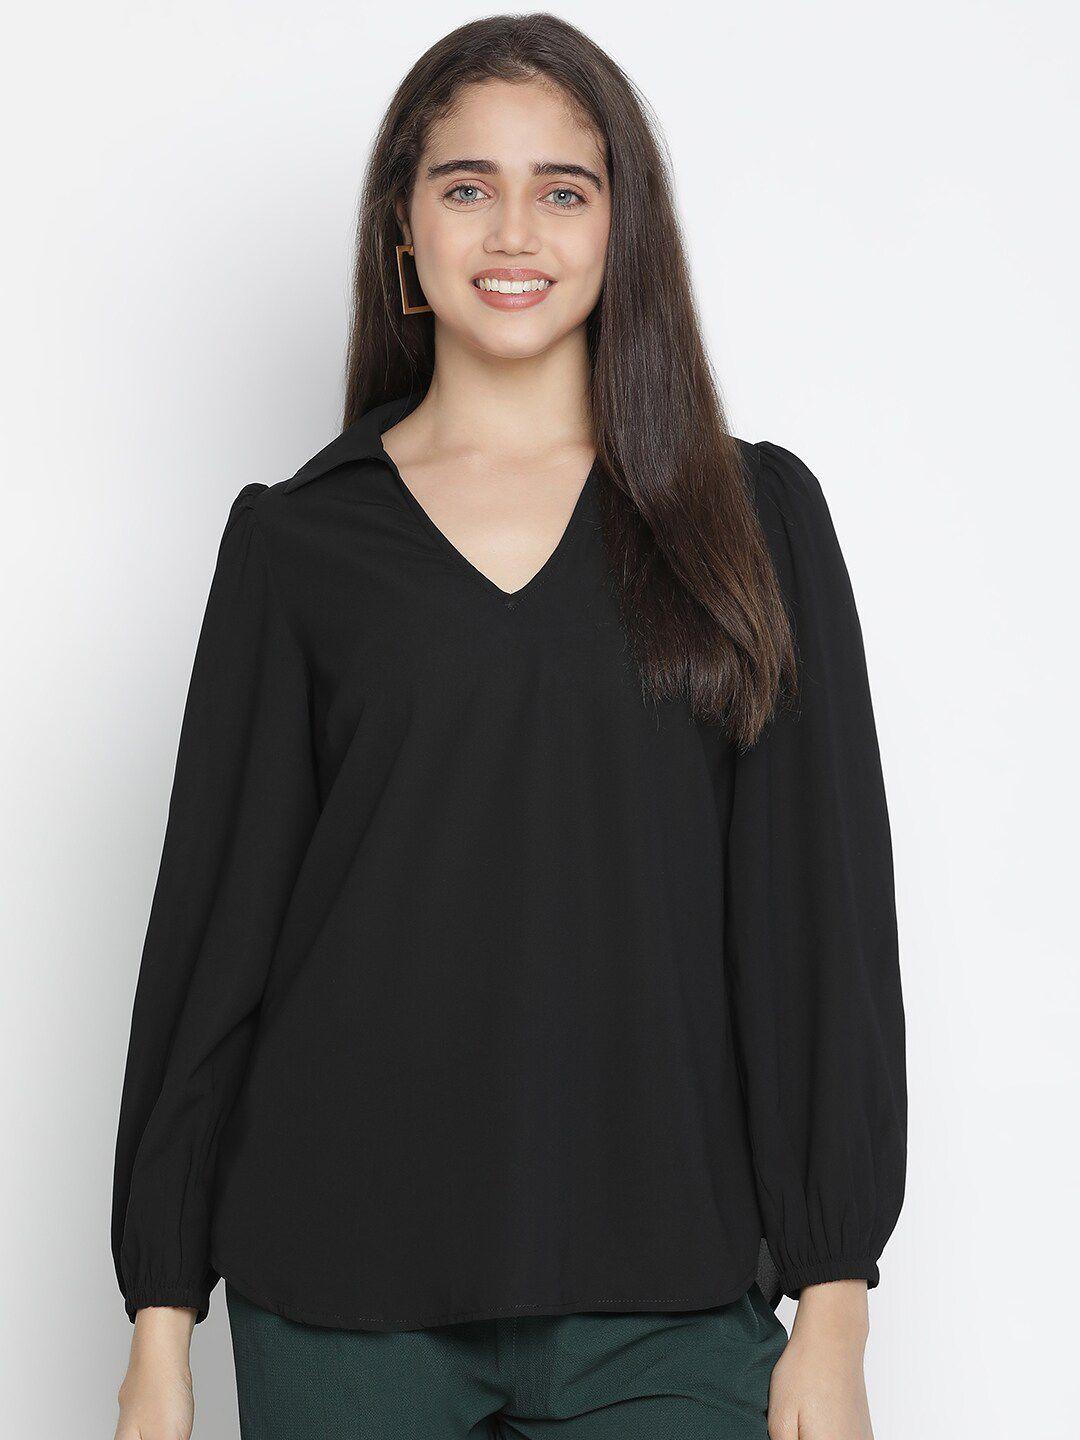 oxolloxo black v-neck puff sleeve top